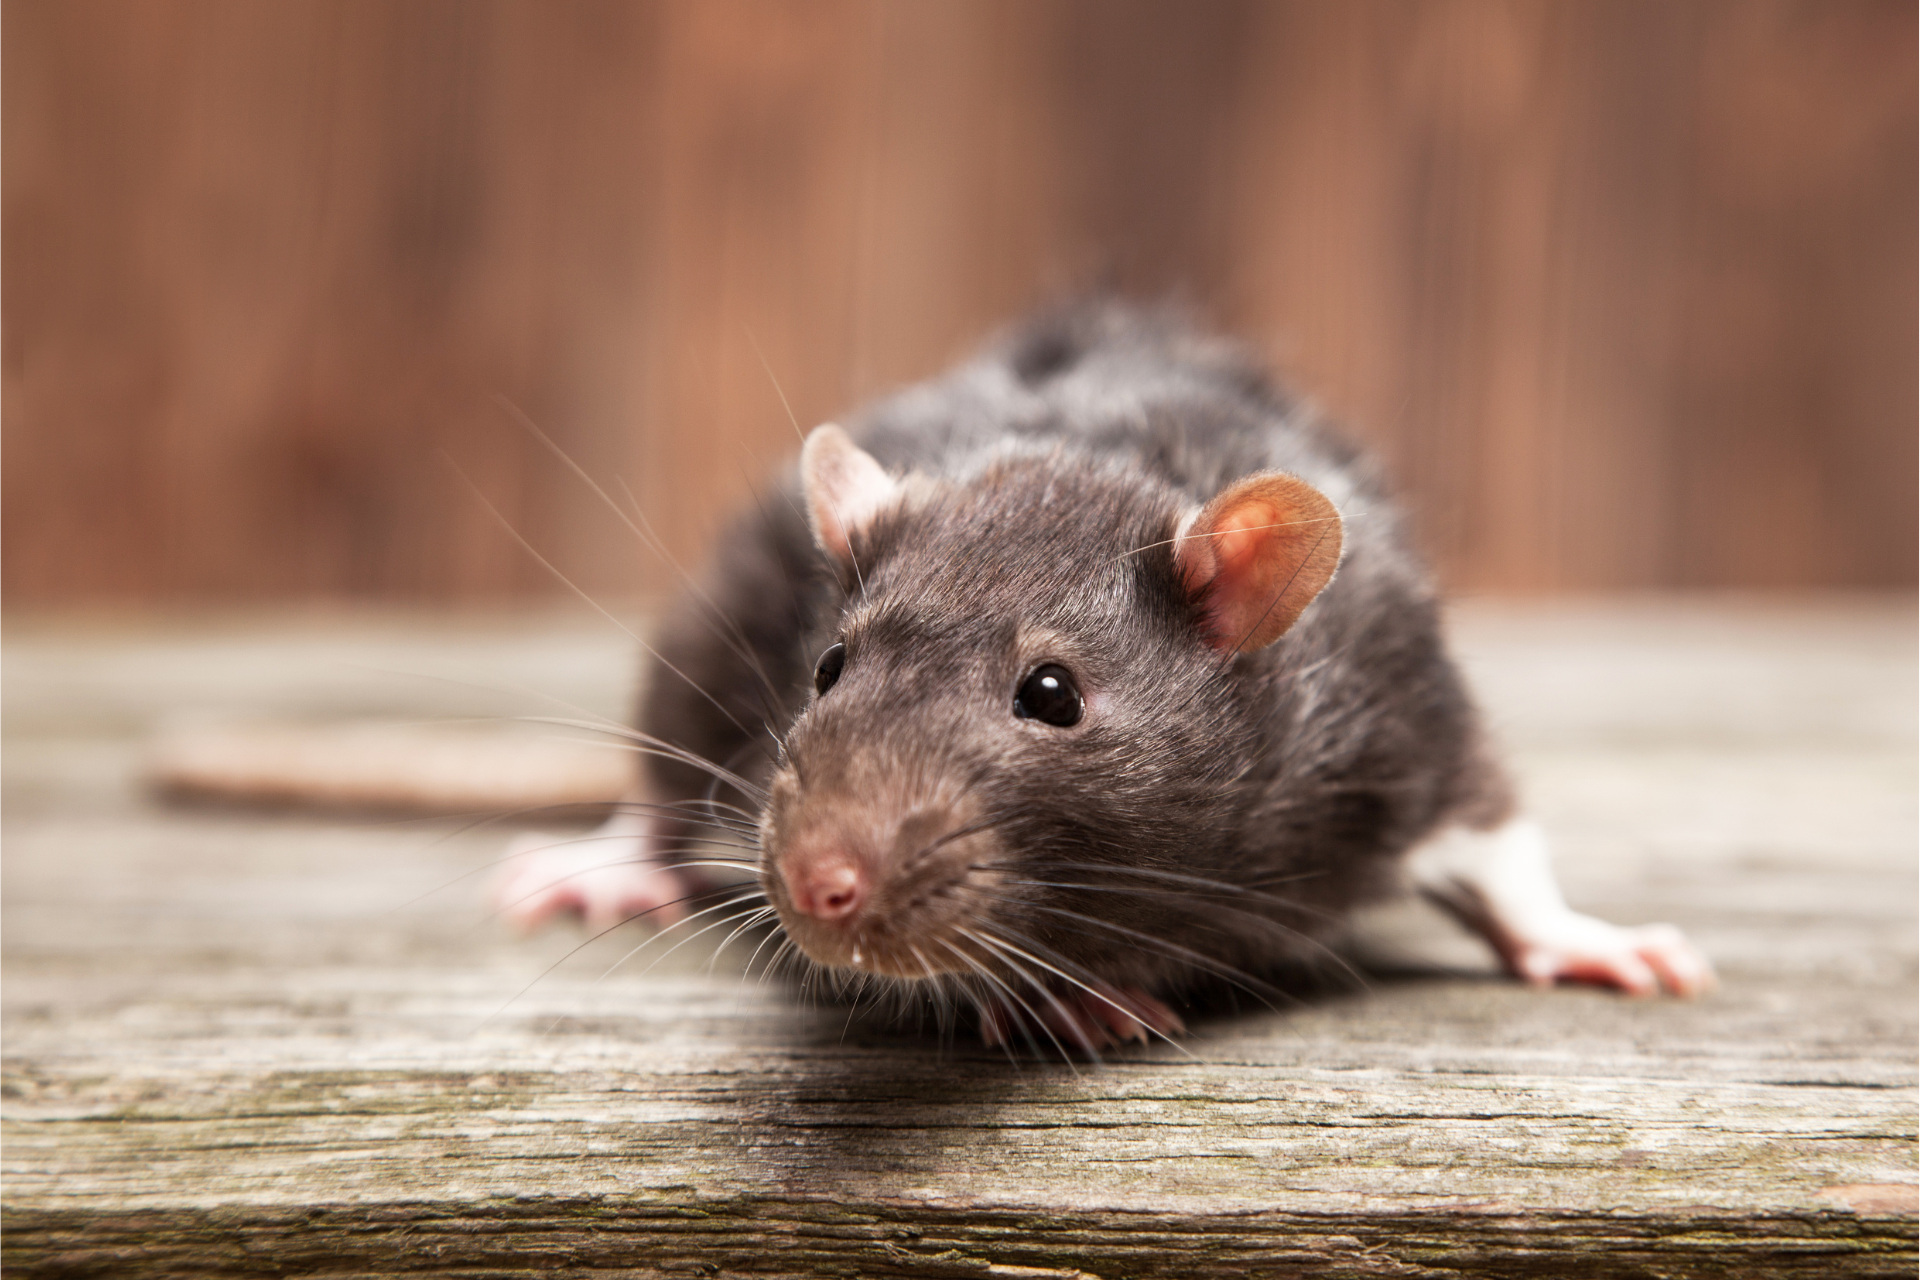 A rat is sitting on a wooden table and looking at the camera.